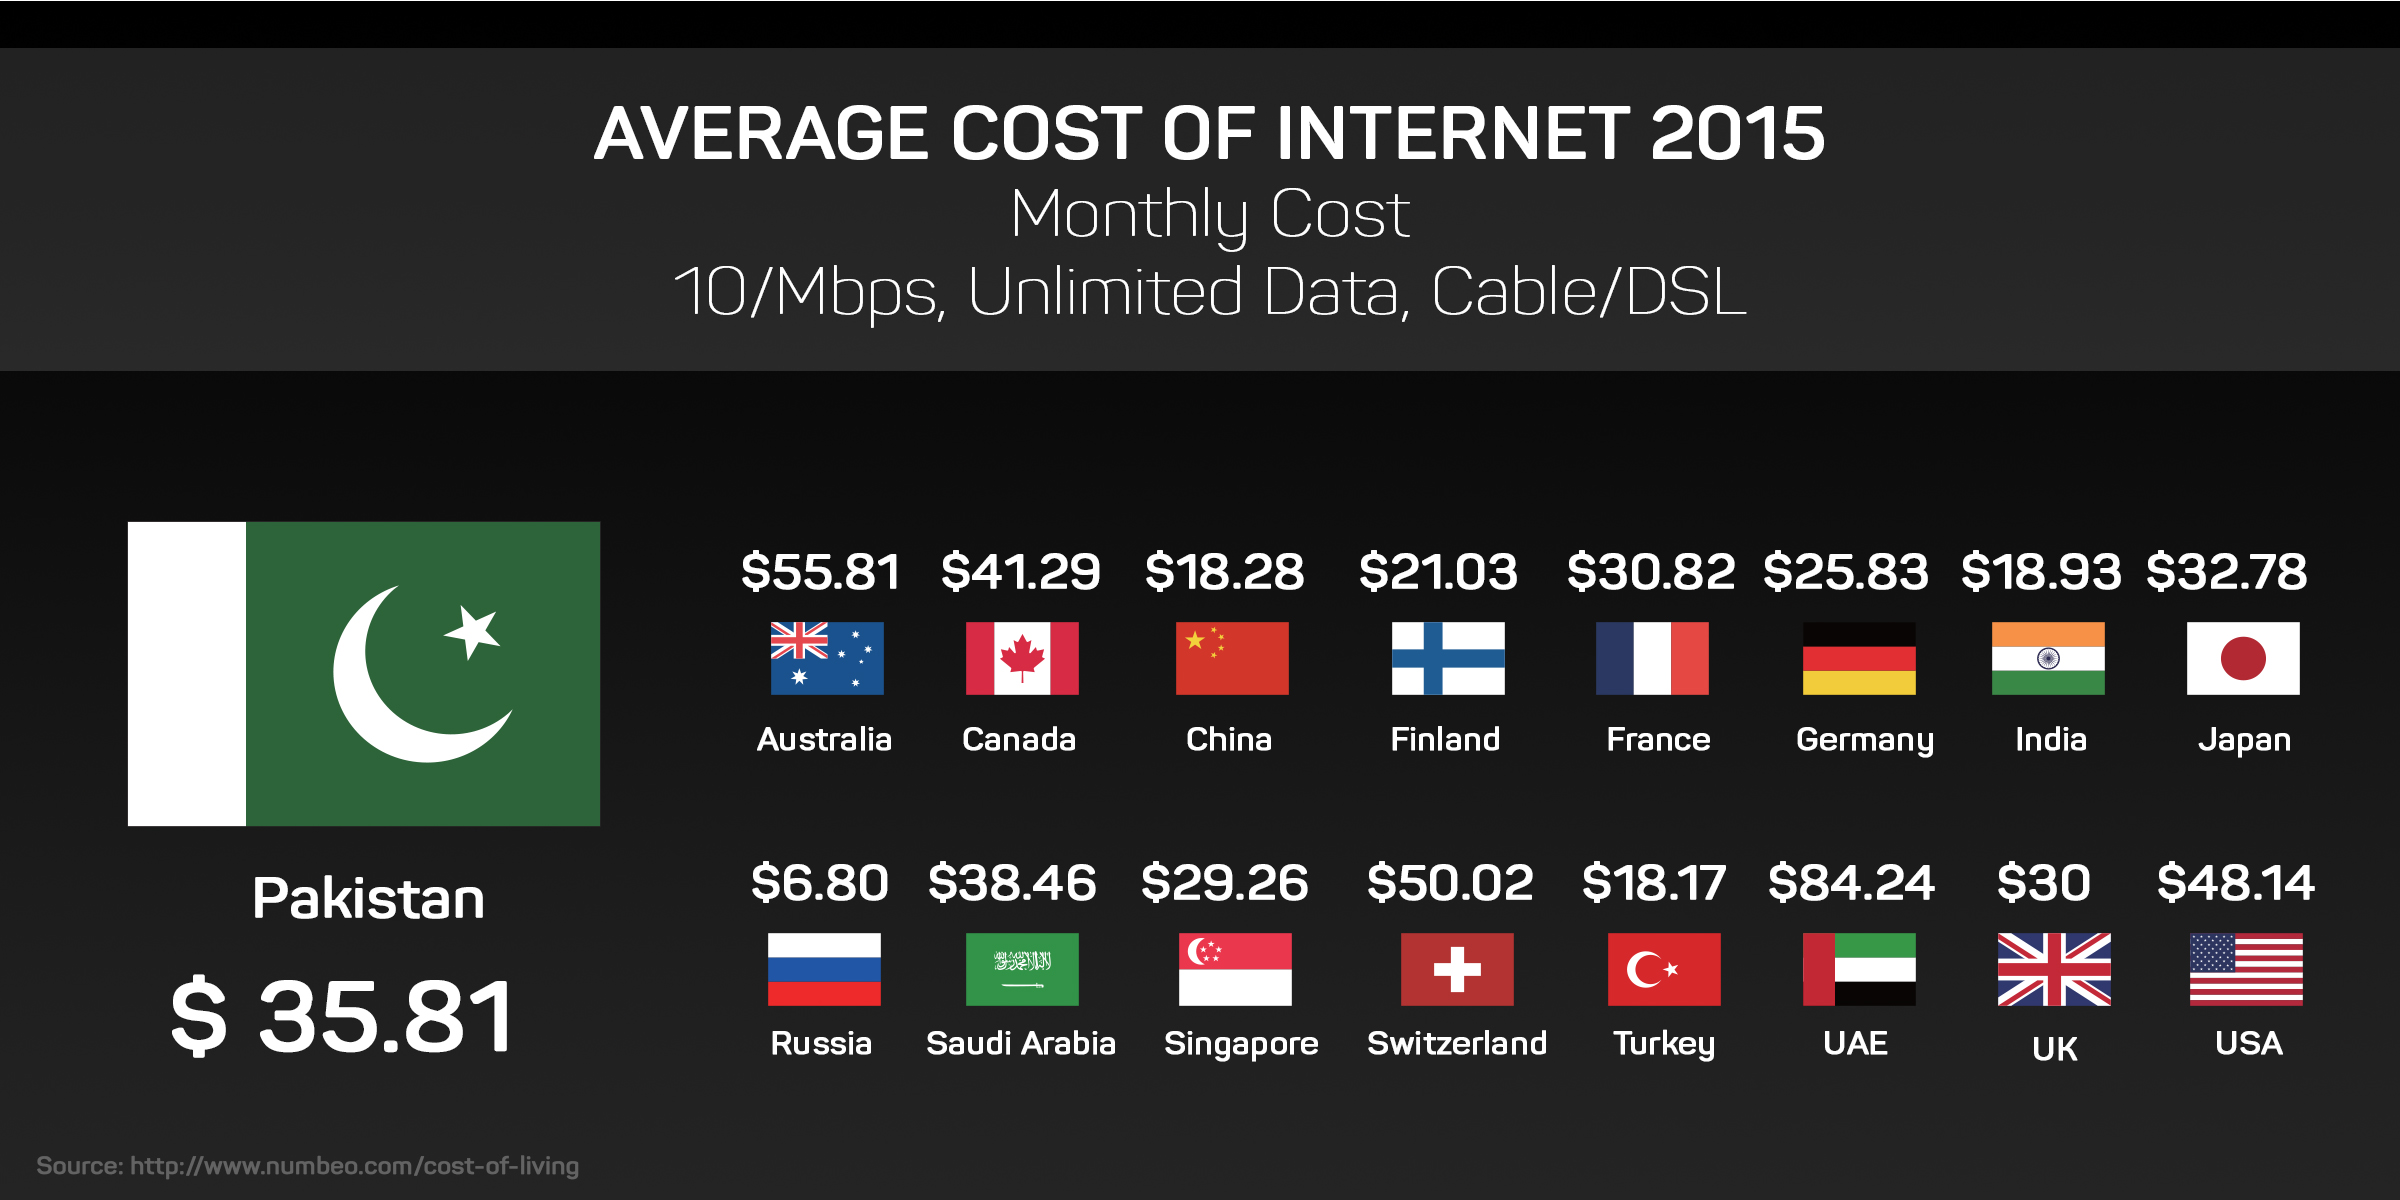 The Cost of Internet: How Does Pakistan Compare to the Rest of the World?